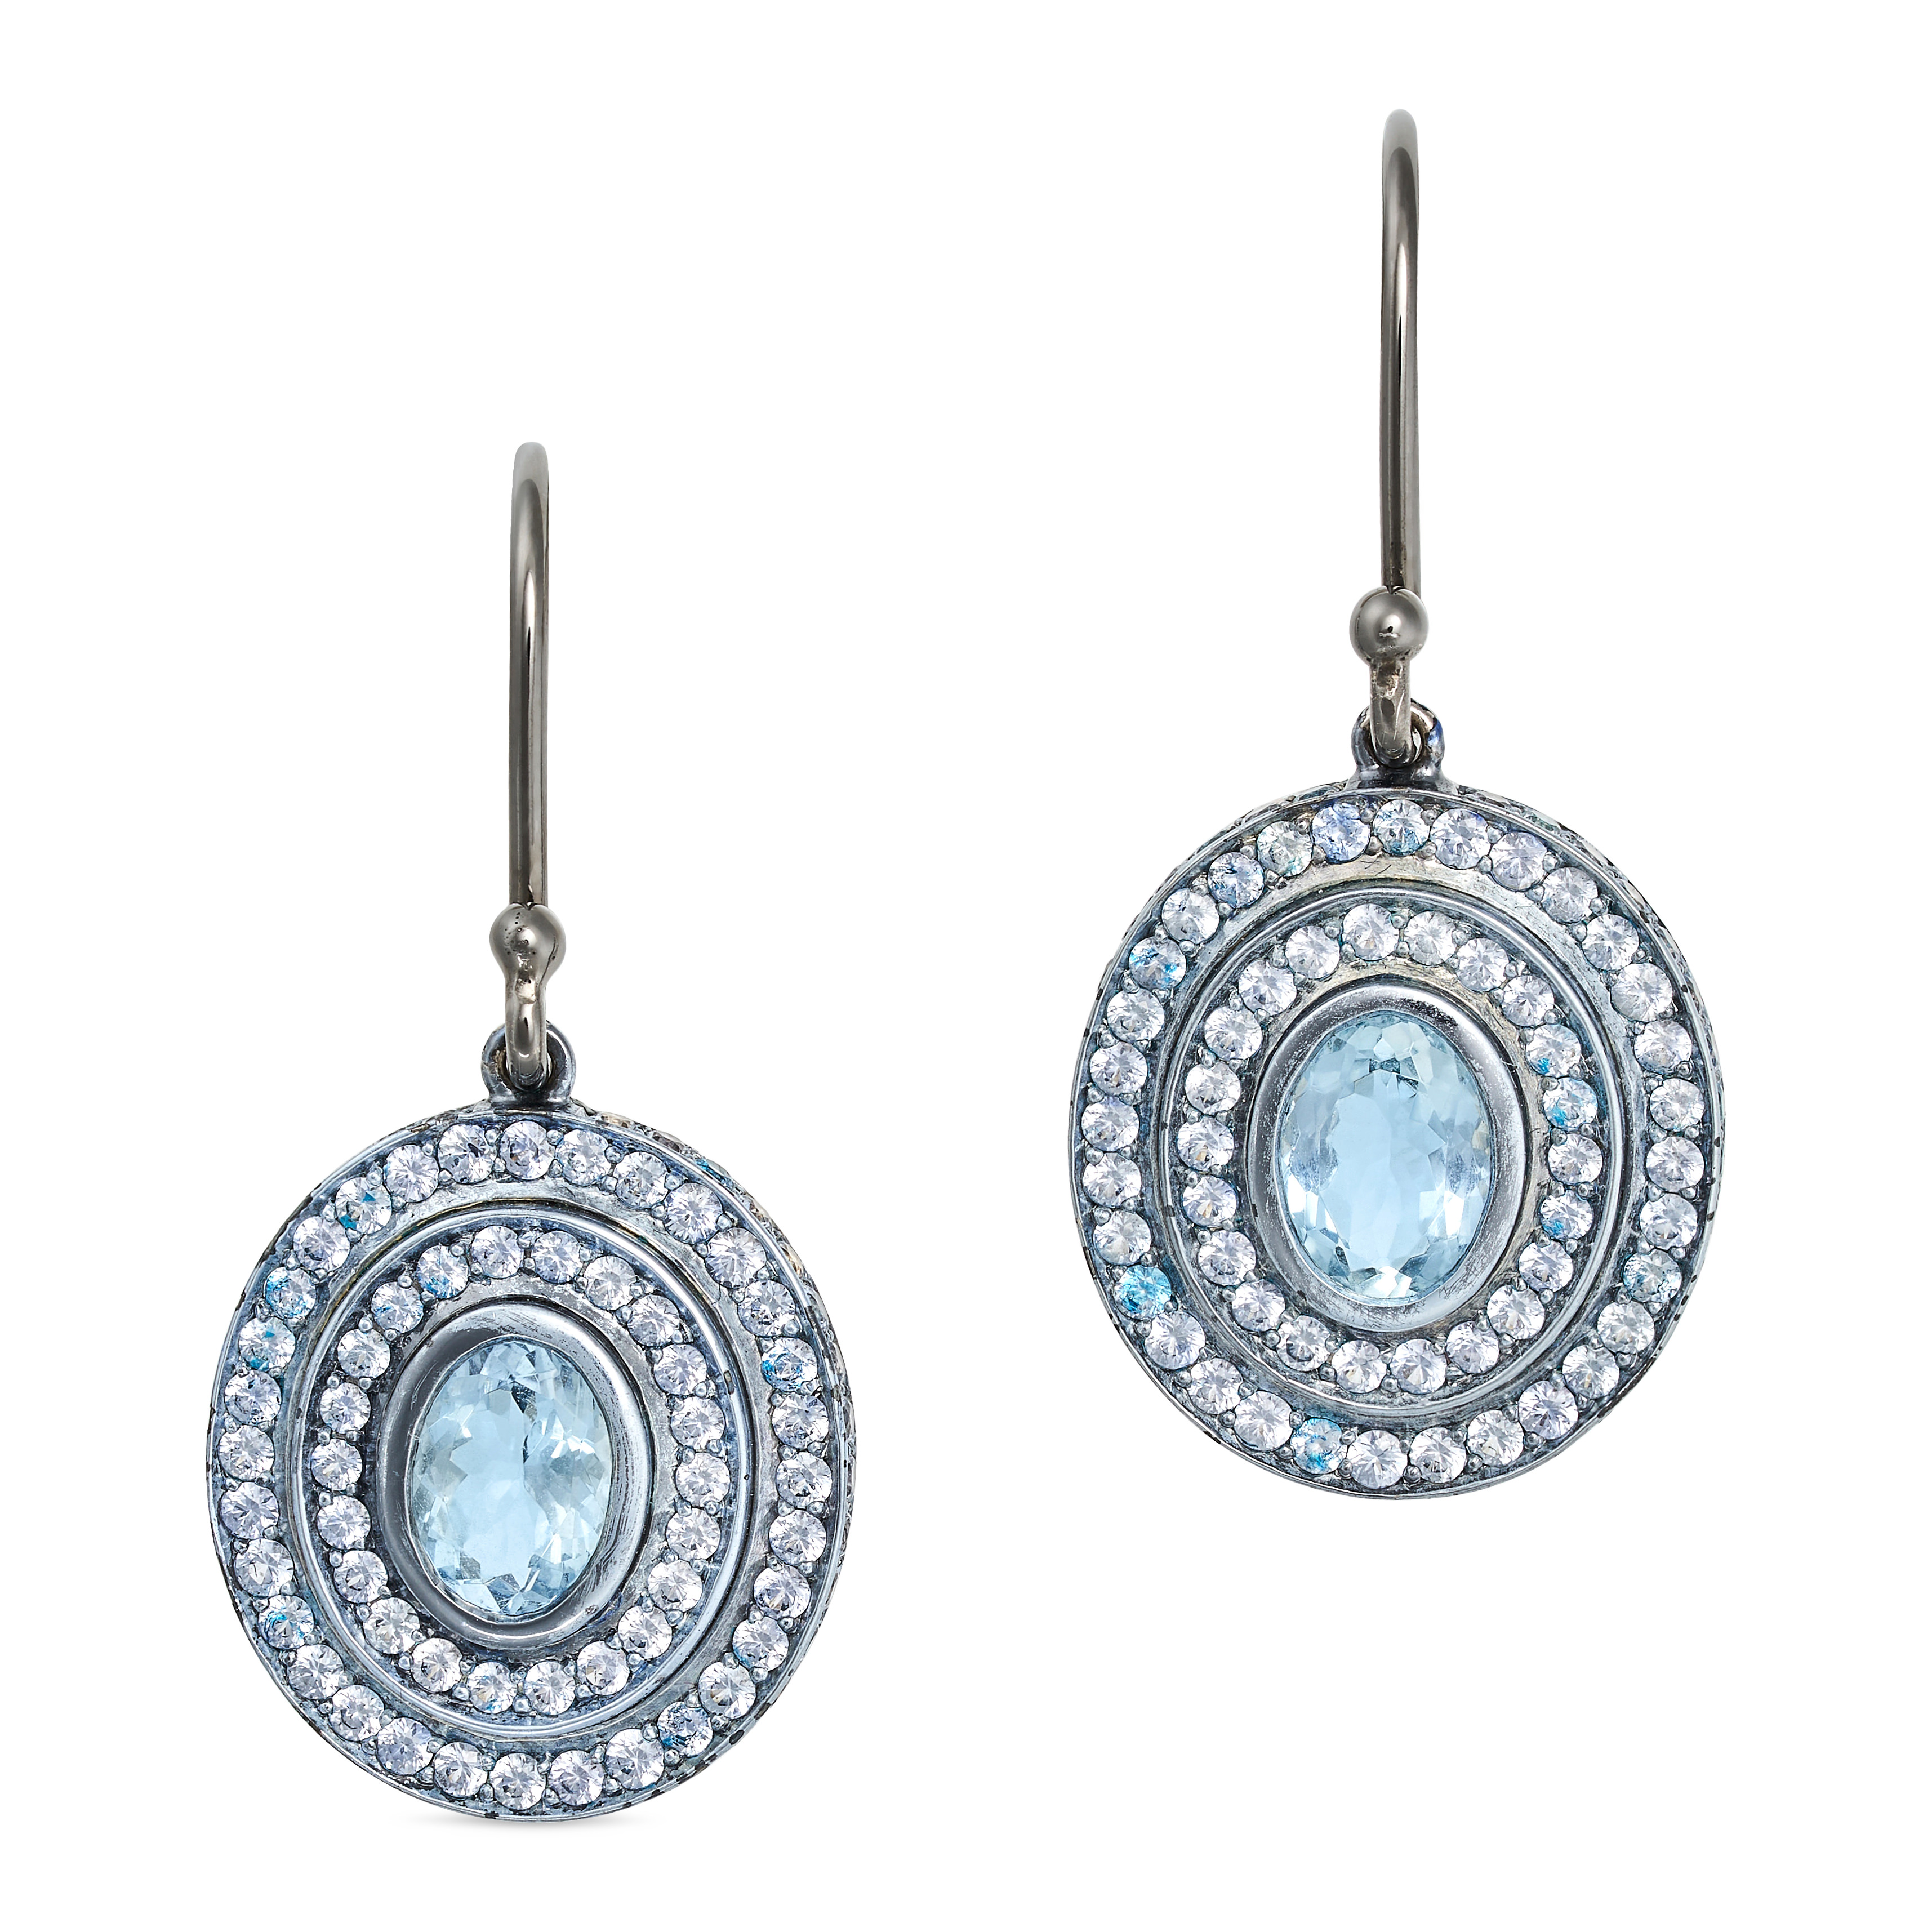 SOLANGE AZAGURY-PARTRIDGE, A PAIR OF AQUAMARINE AND SAPPHIRE DROP EARRINGS in 18ct blackened gold...